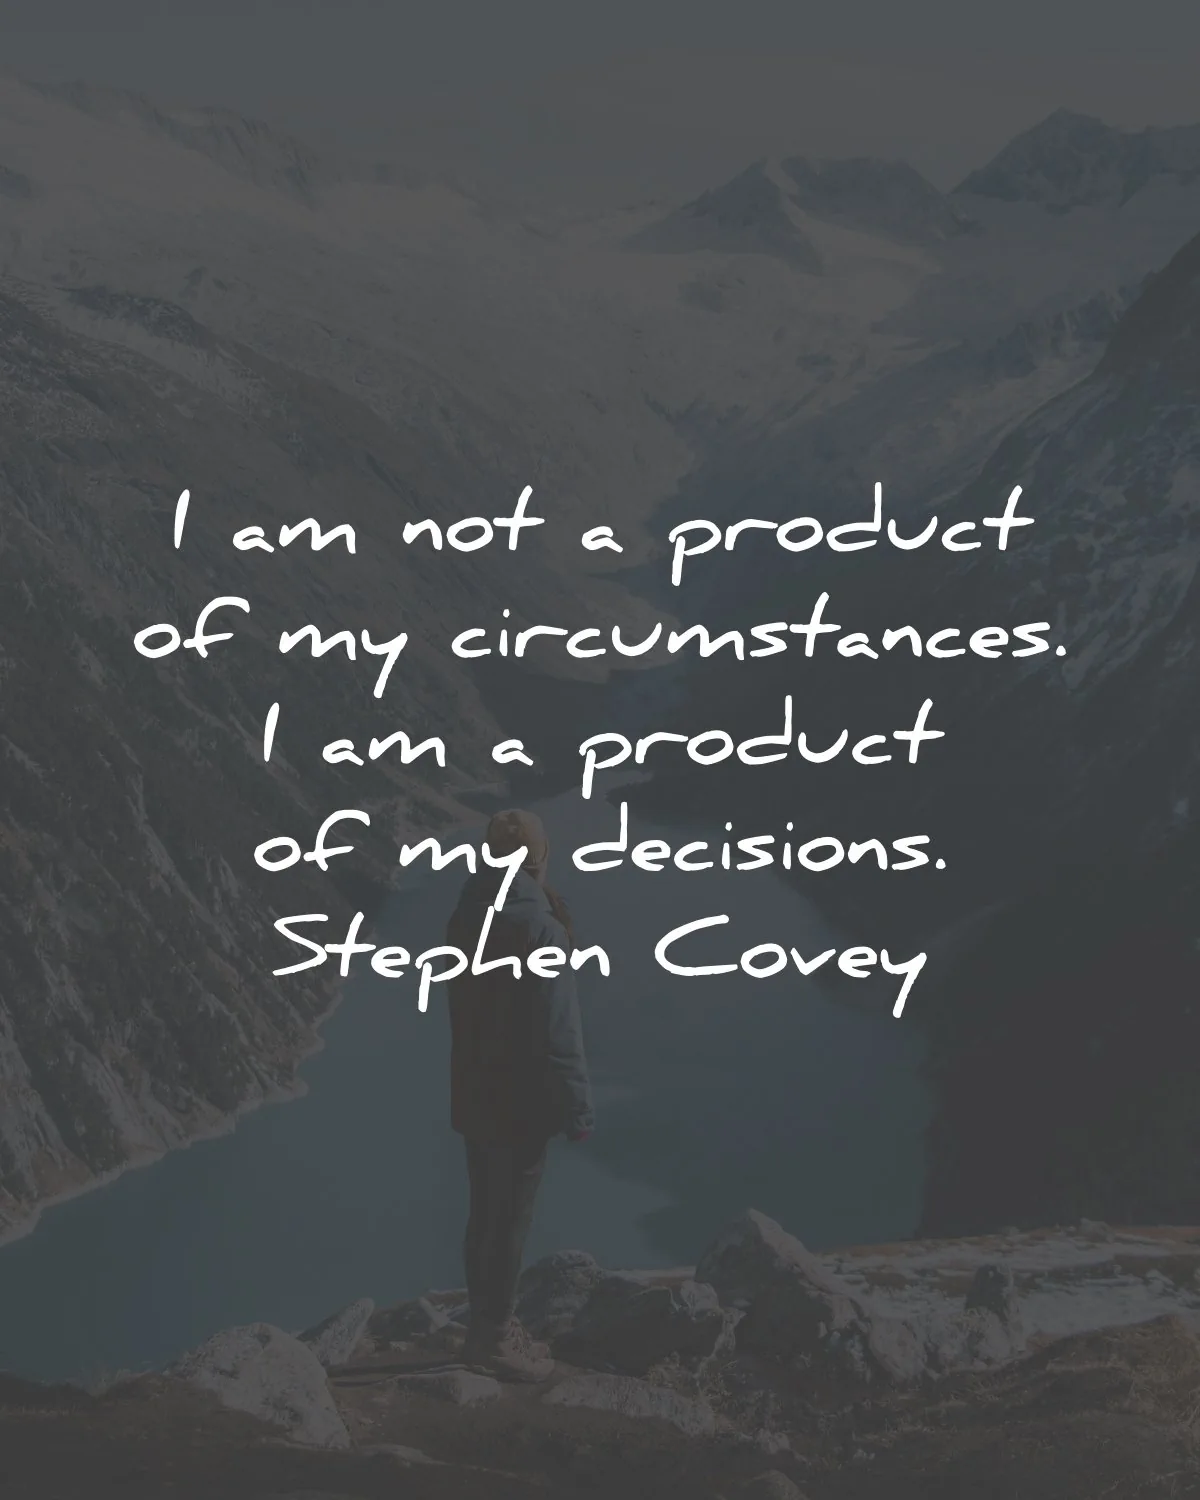 quote of the day not product circumstances stephen cover wisdom quotes